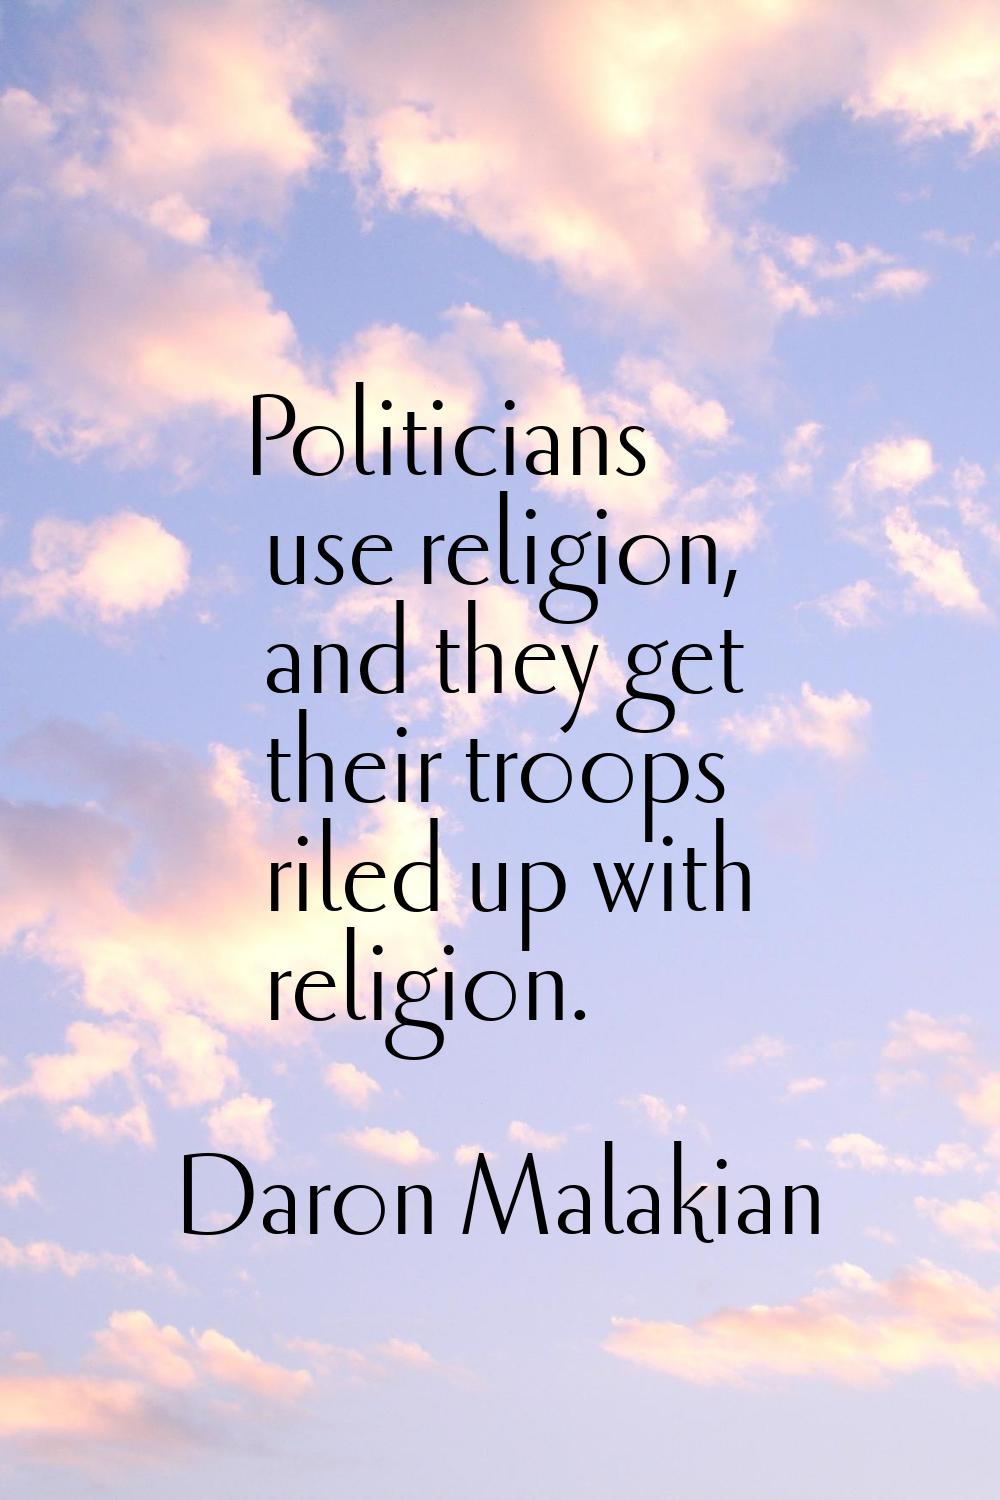 Politicians use religion, and they get their troops riled up with religion.